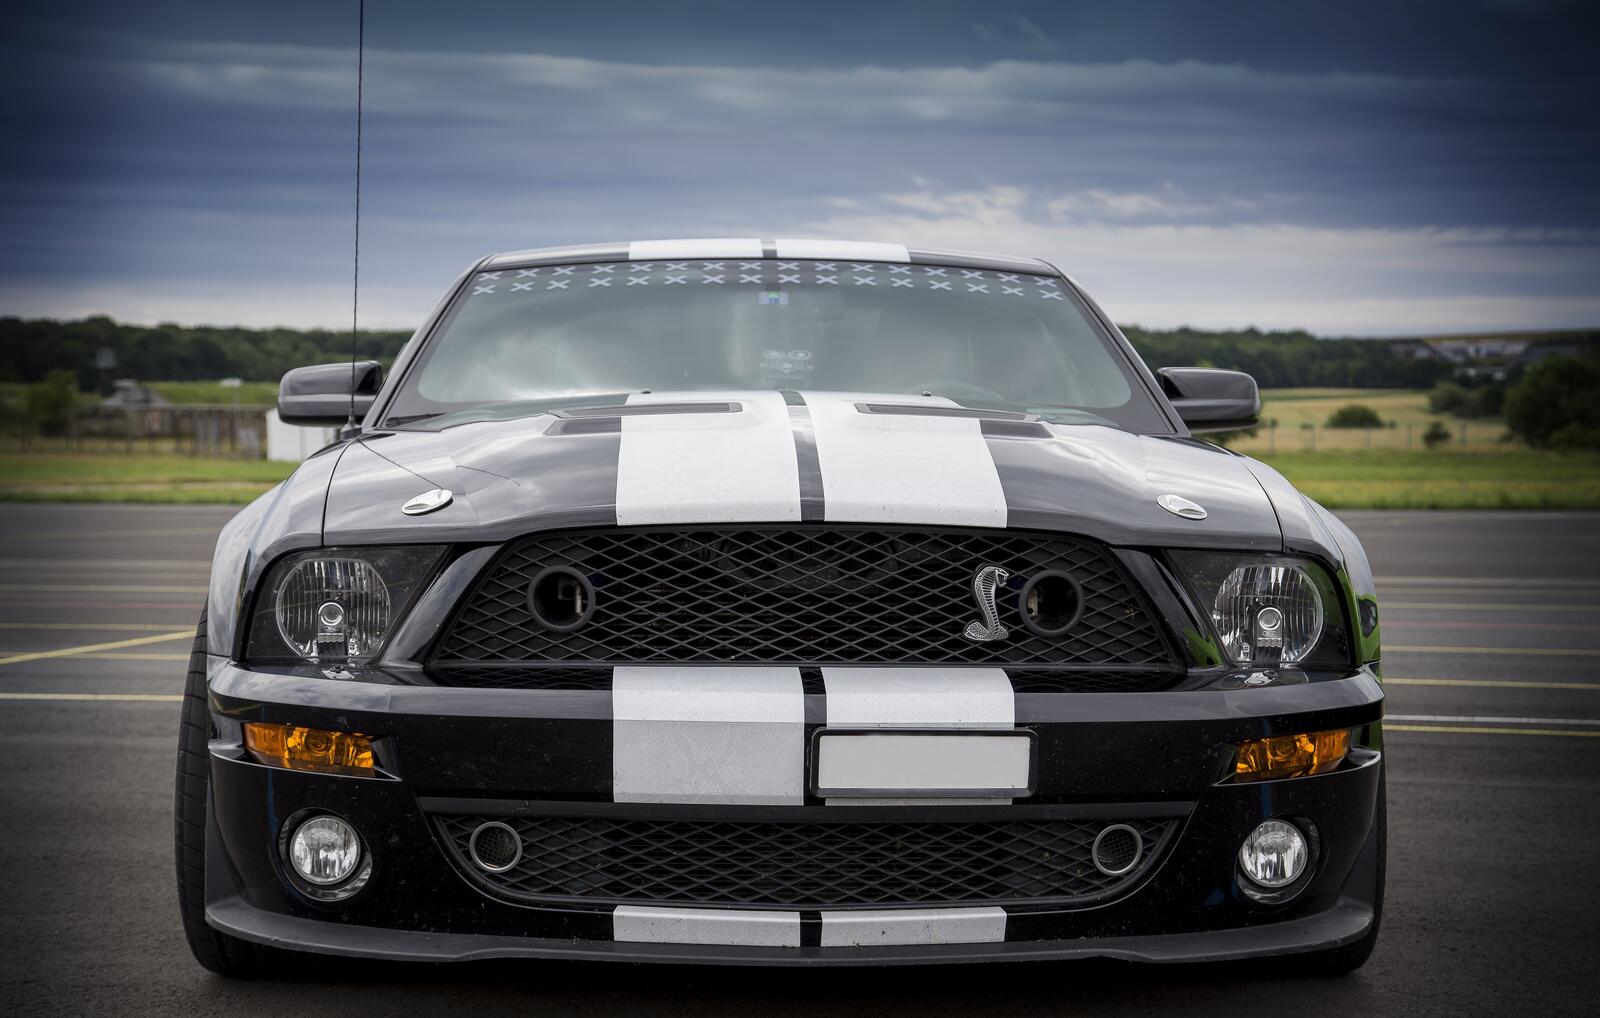 Free photo Ford Mustang Shelby with white stripes on the hood.